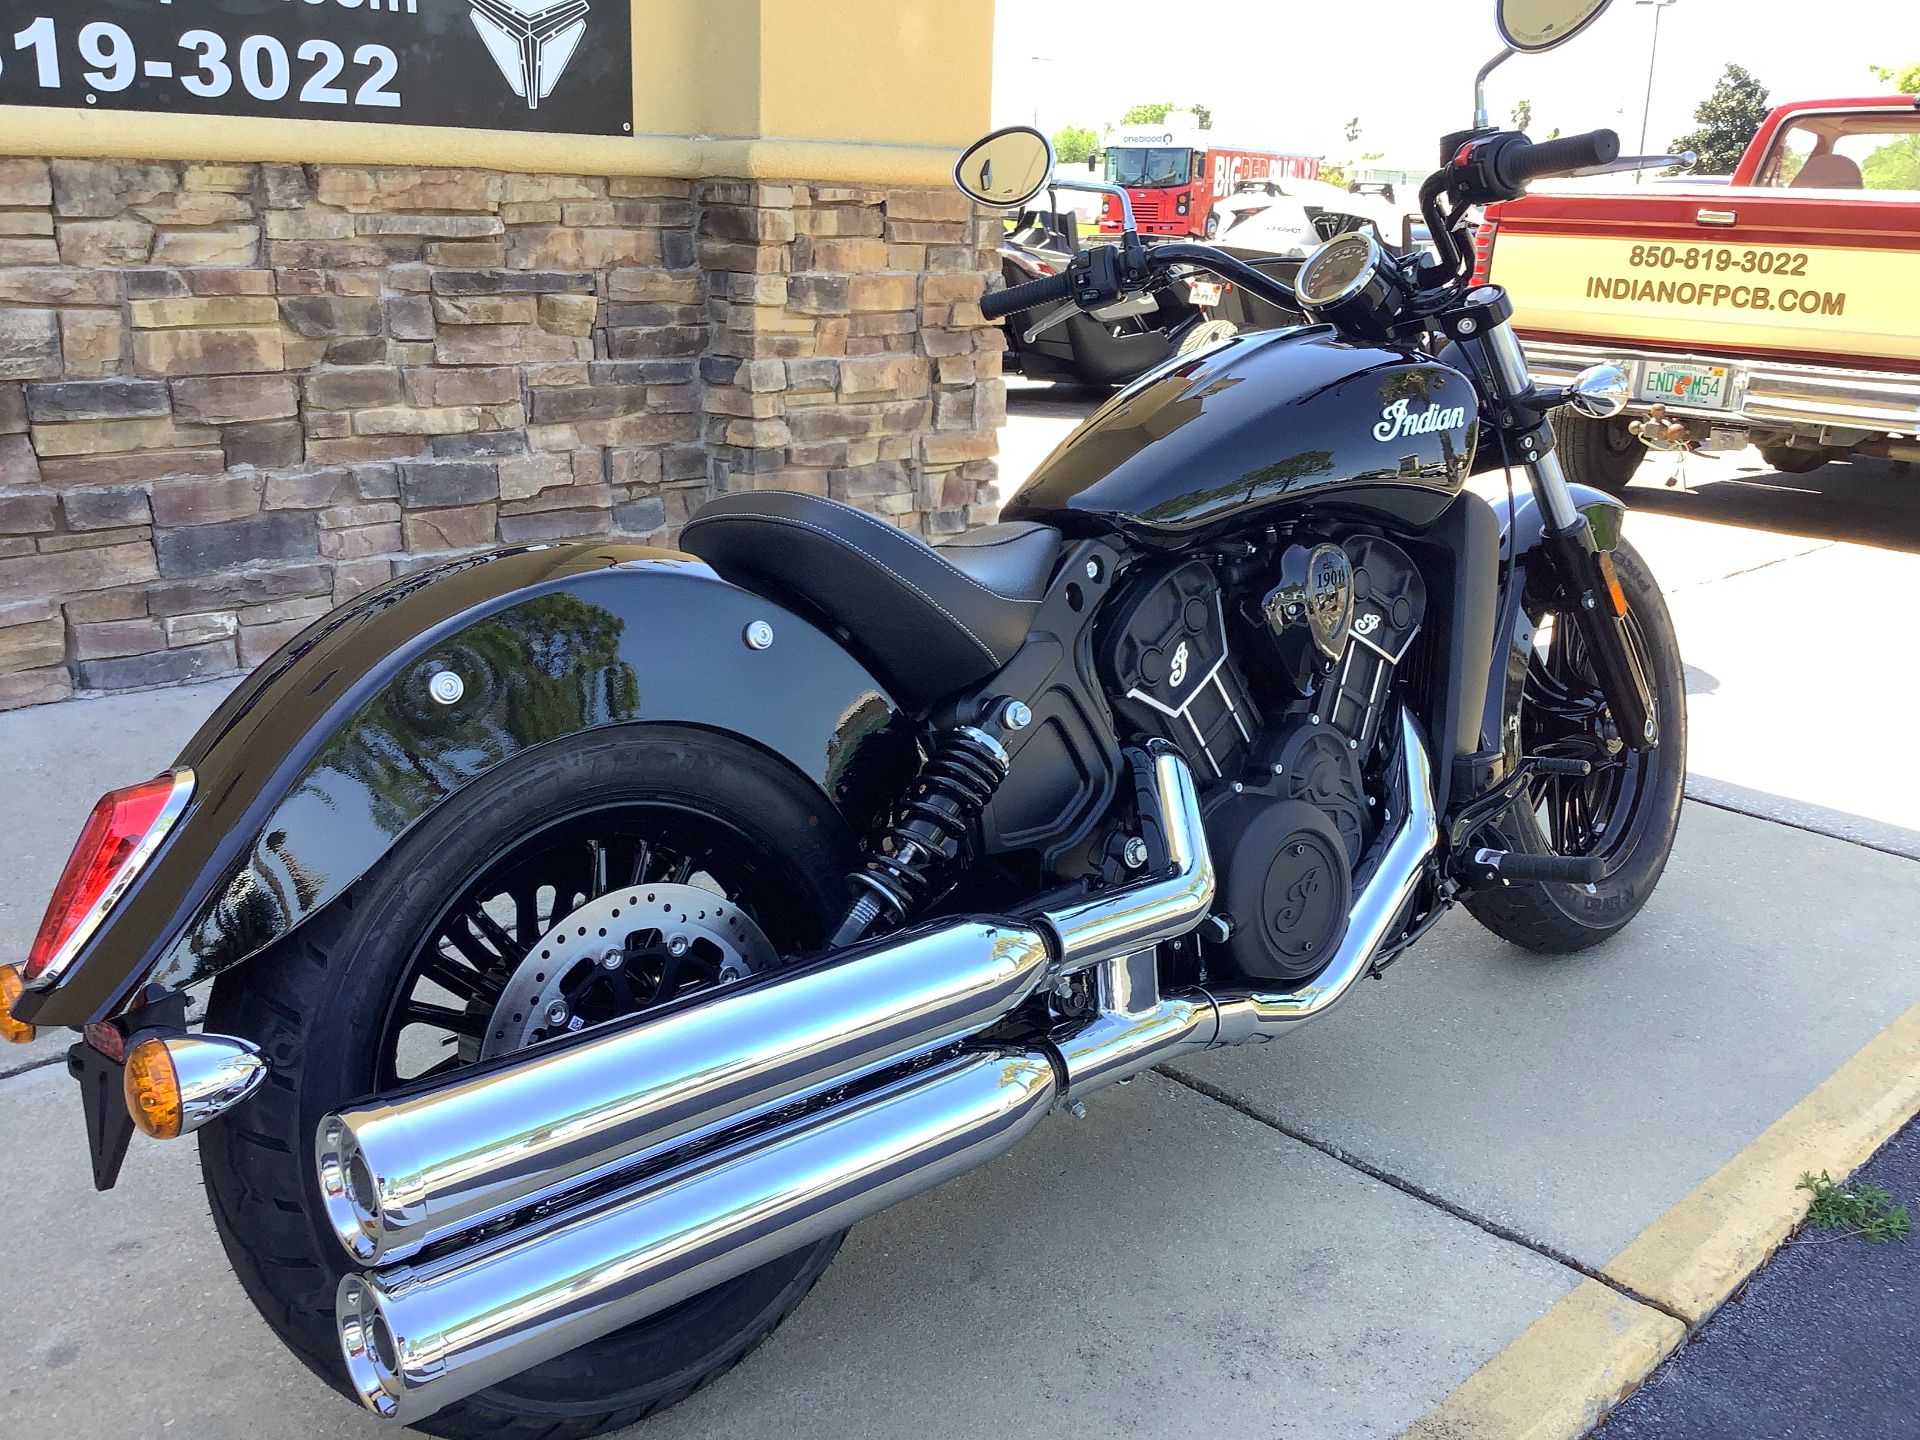 2022 Indian SCOUT 60 NON ABS in Panama City Beach, Florida - Photo 6